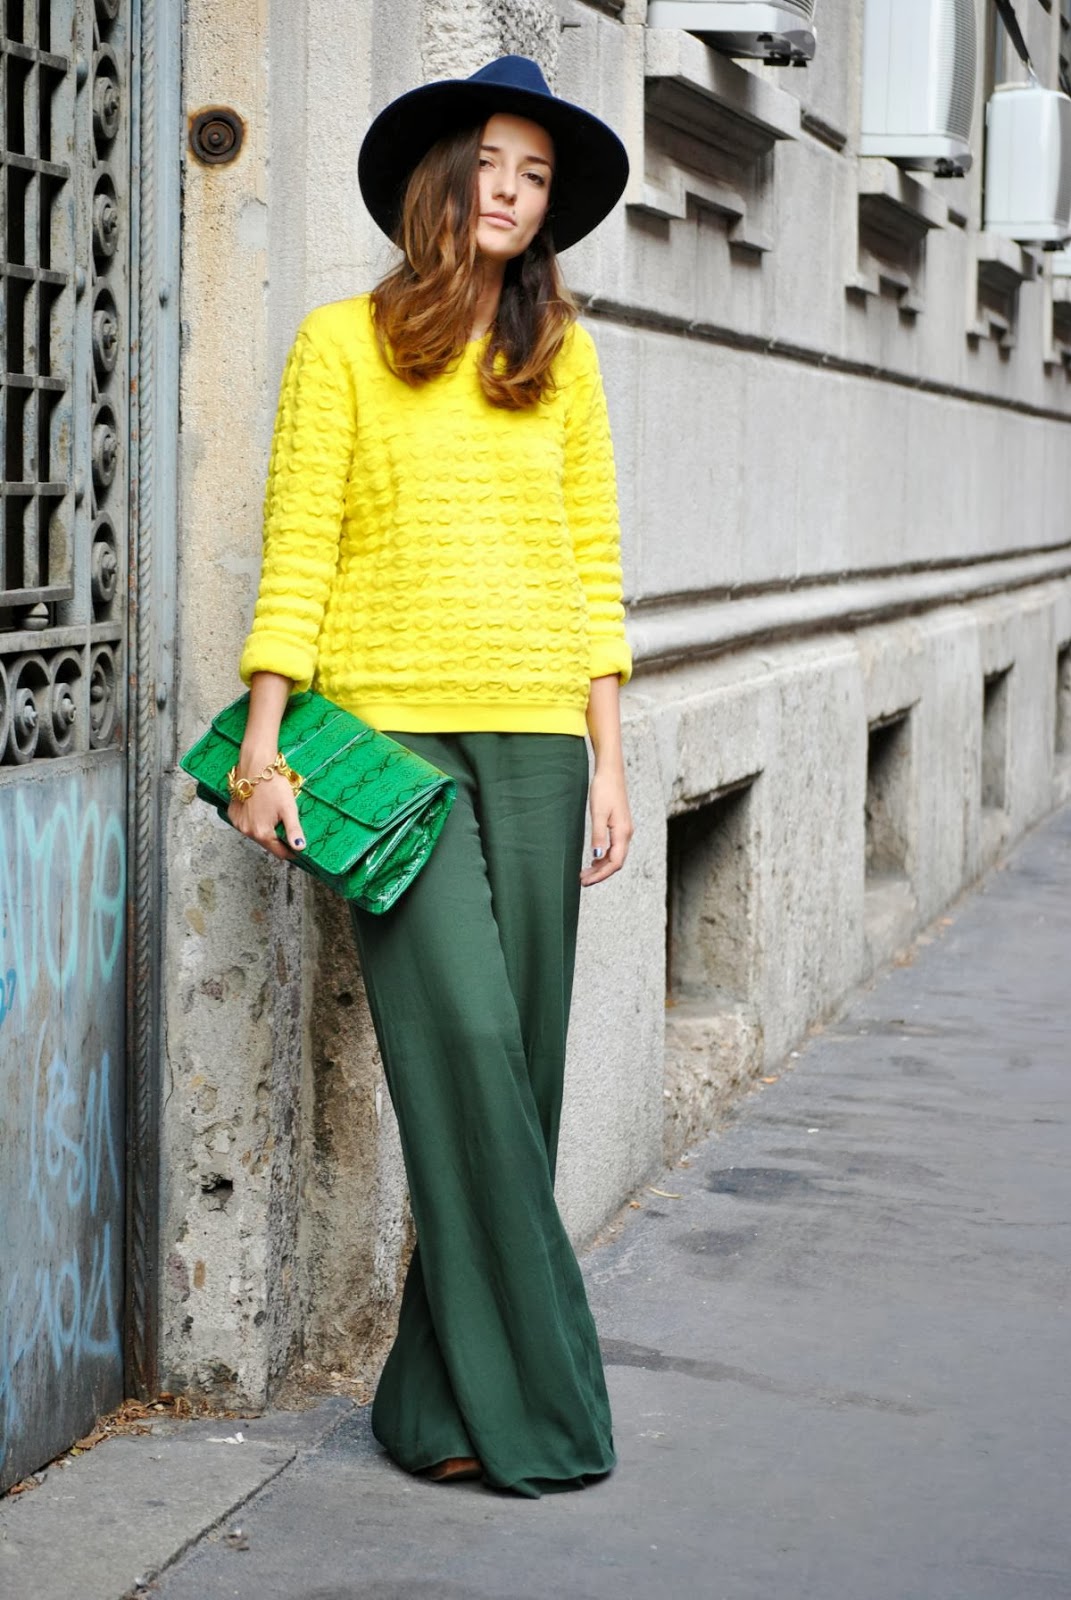 Side Street Style: Next season’s trends now: My top 5 transitional pieces